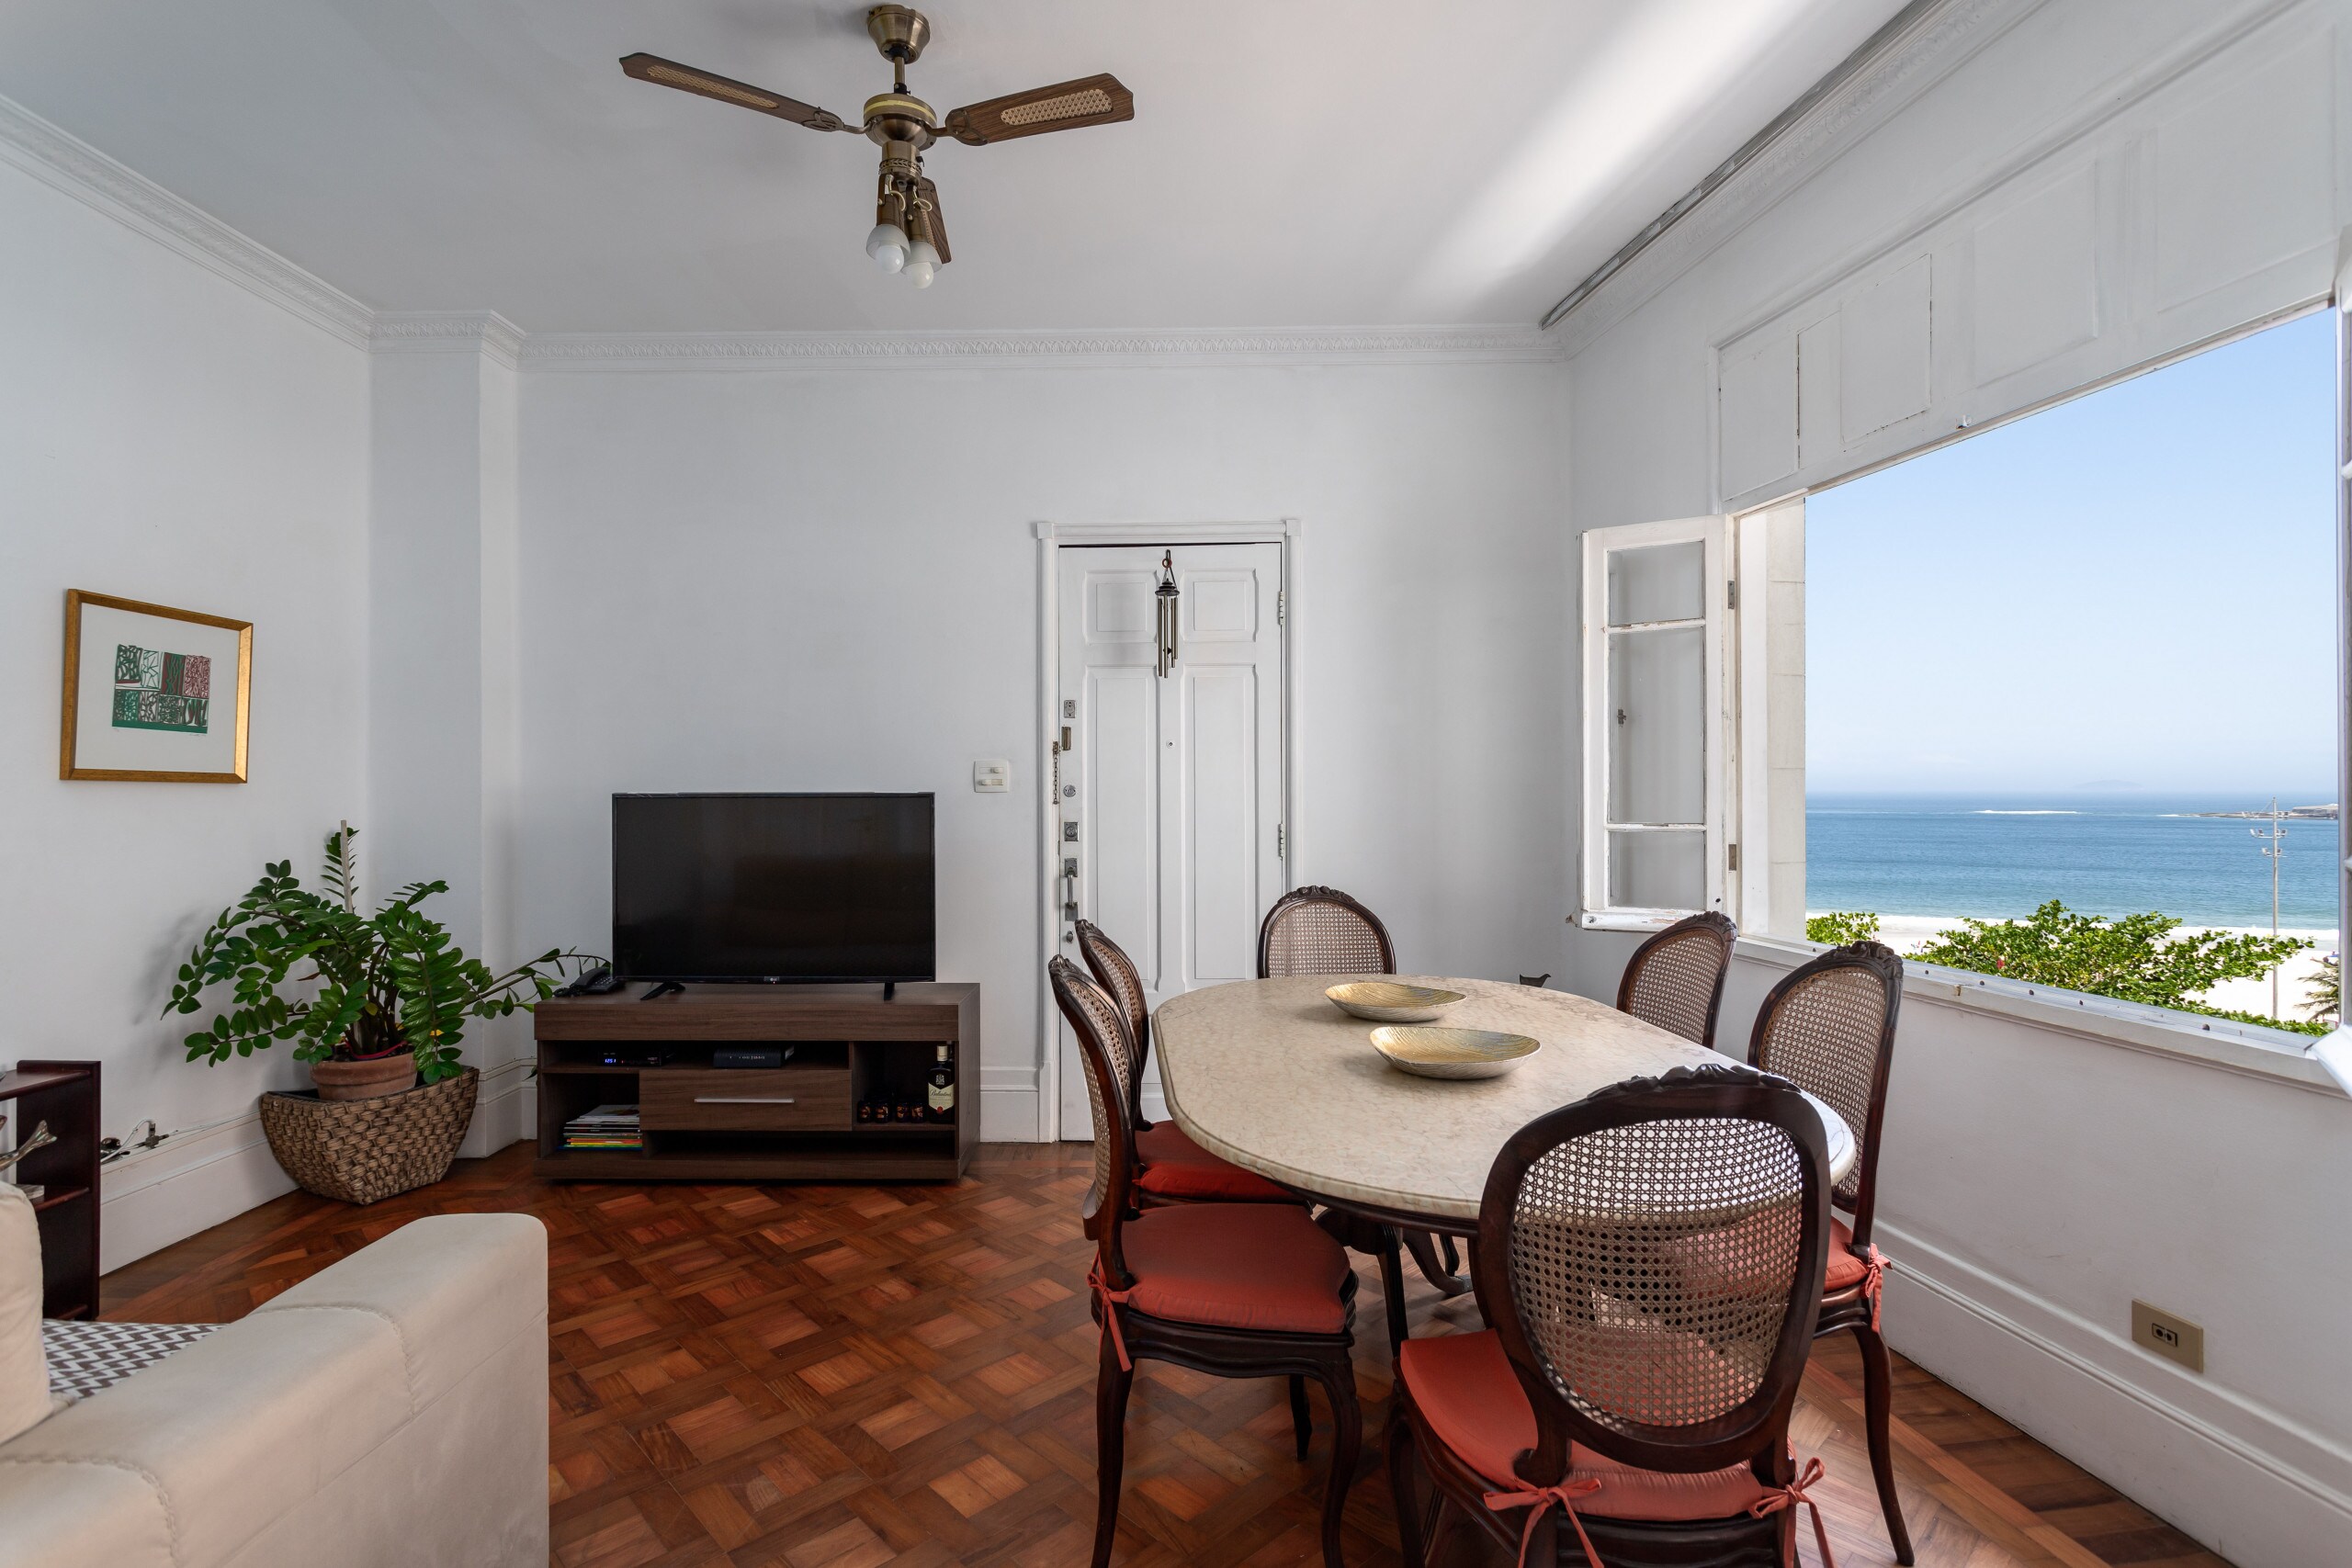 Property Image 1 - Traditional Apartment in Copacabana with Ocean Views